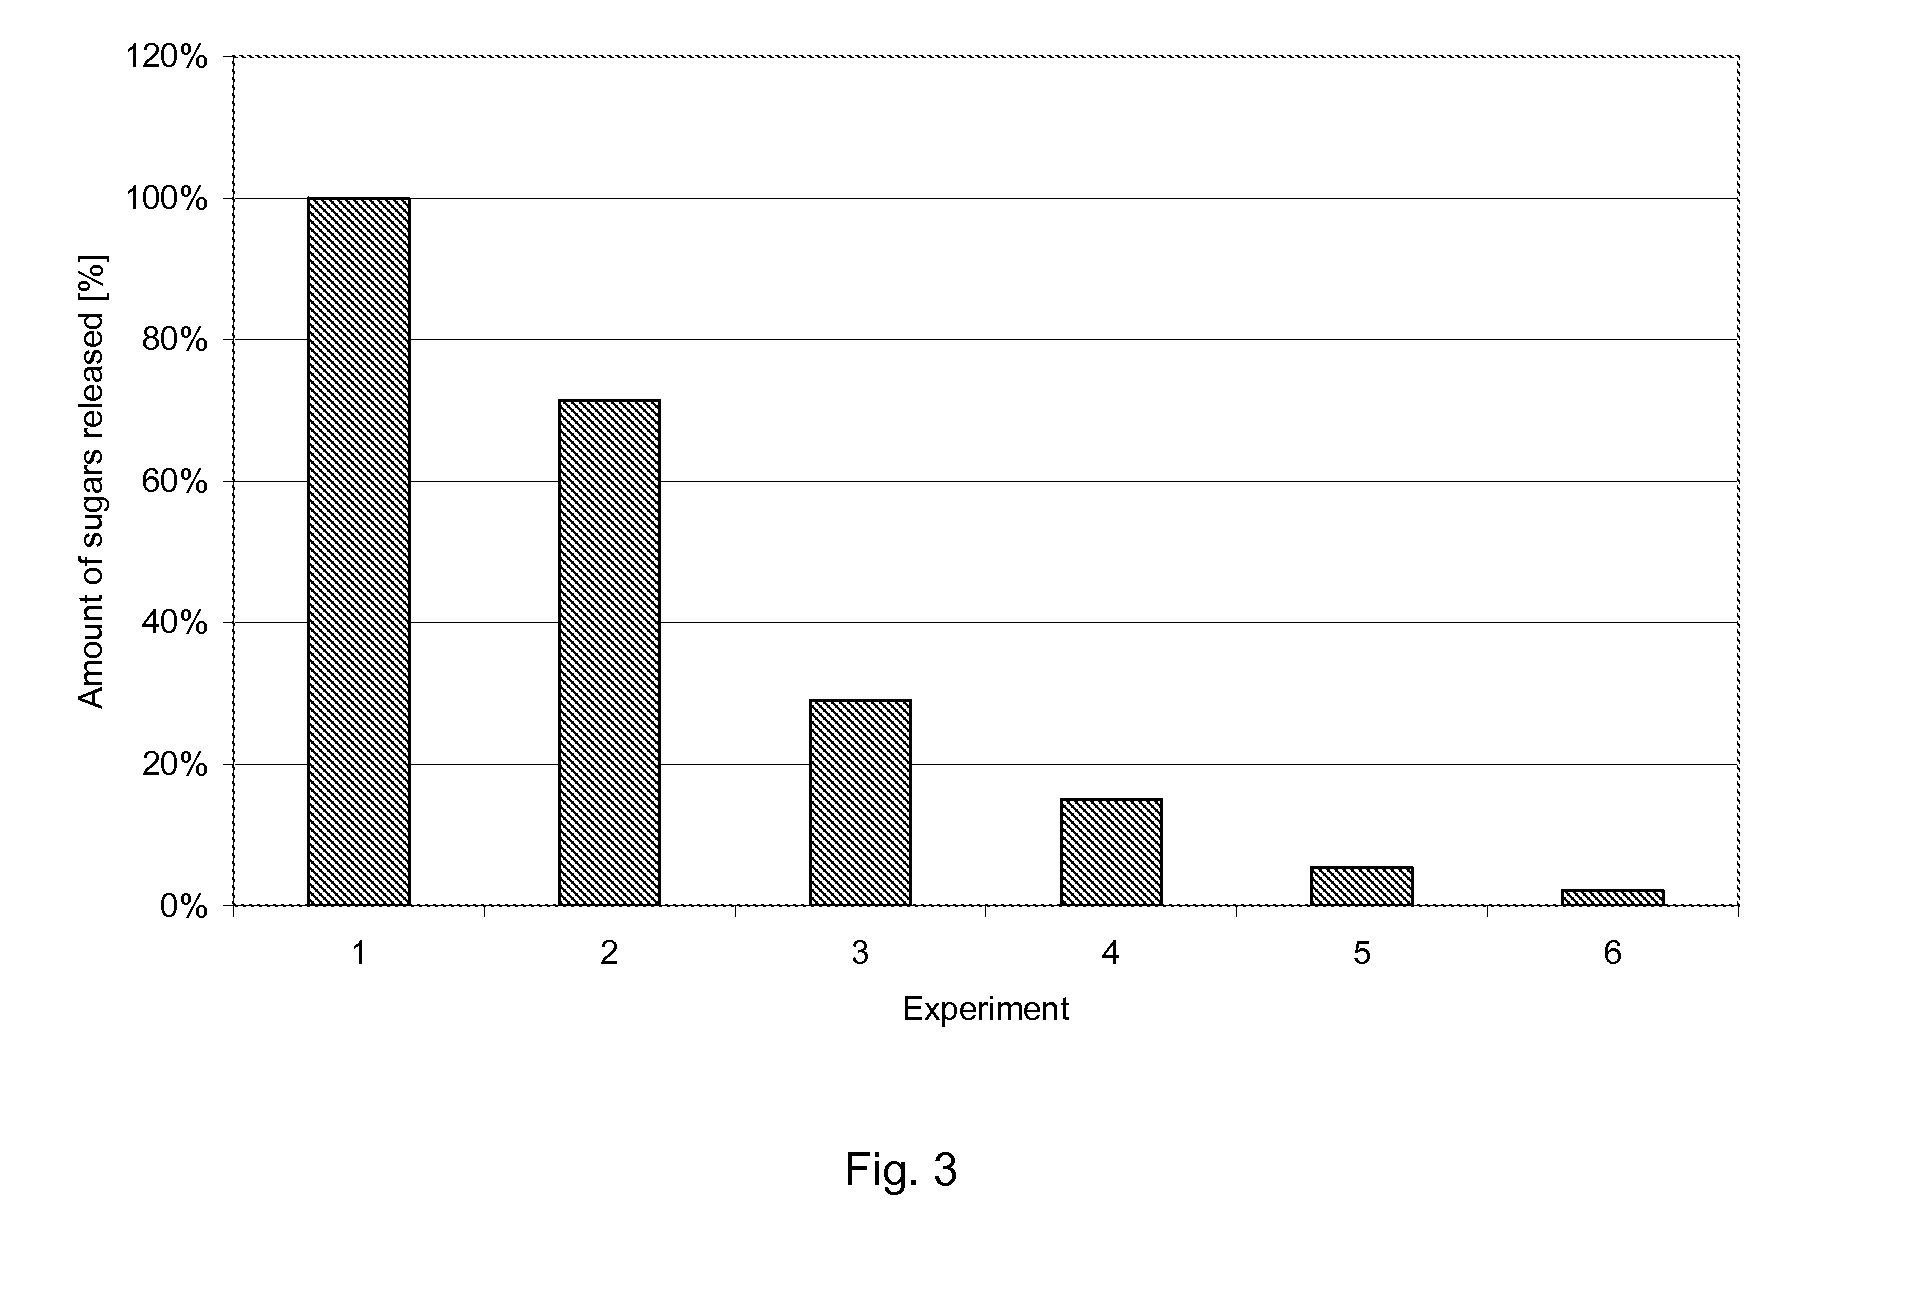 Process for enzymatic hydrolysis of lignocellulosic materila and fermentation of sugars